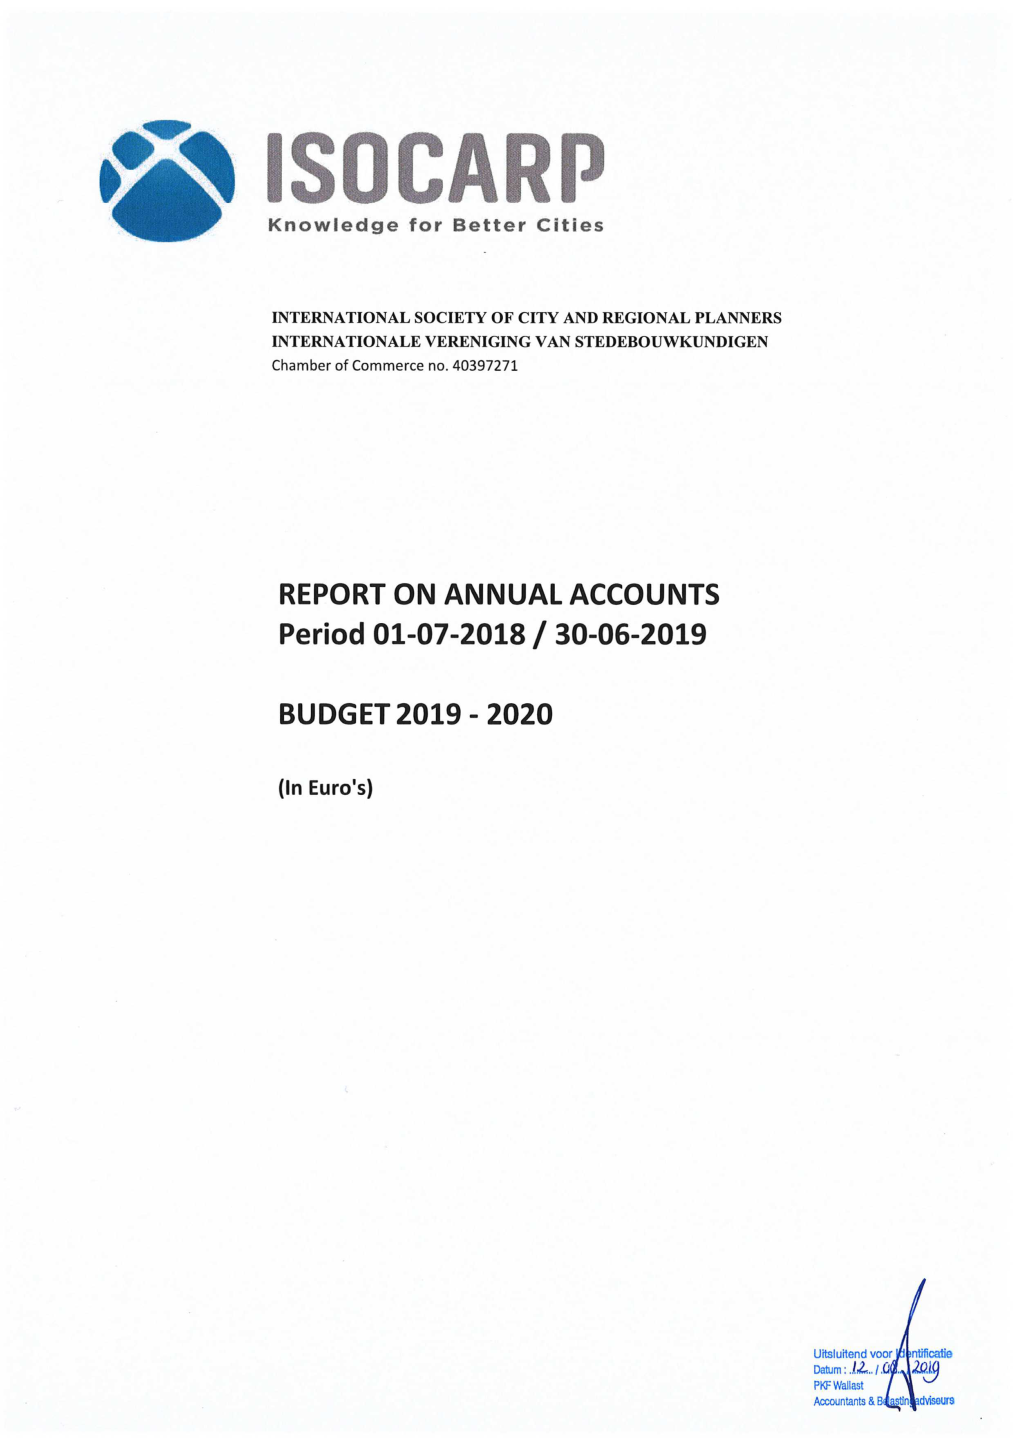 2018-2019 Annual Accounts and 2019-2020 Budget